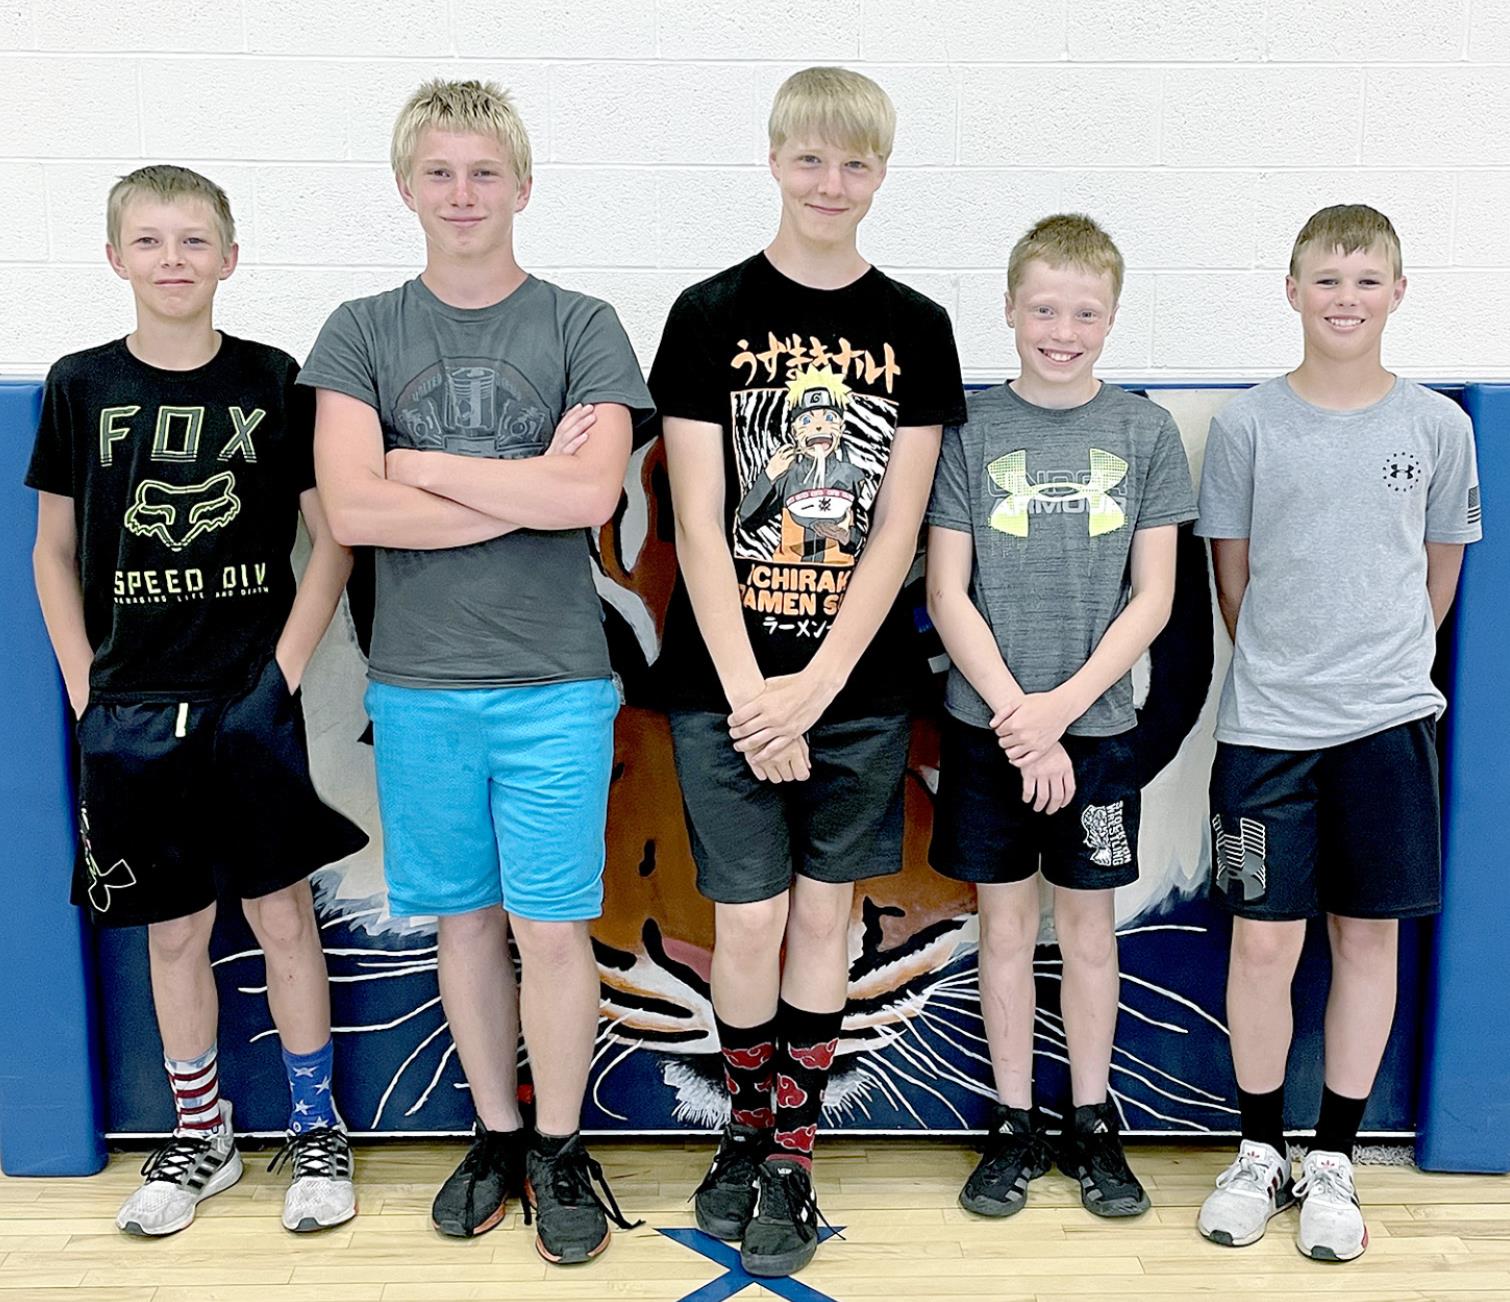 THE STOCKTON JUNIOR HIGH SEVENTH-GRADE BOYS placed fourth as a team at the MCEL Track Meet. Individuals scoring points for the Tigers were from left: Cameron Earl (100MH, 200MH, 4 x 100M Relay, 4 x 200M Relay), Isaac Thayer (100M, Long Jump, 4 x 100M Relay, 4 x 200M Relay), Pierce Gray (100M, 200M, 4 x 100M Relay), Zeke Balthazor (4 x 100M Relay, 4 x 200M Relay) and Jace Kesler (4 x 200M Relay). (Courtesy Photo)